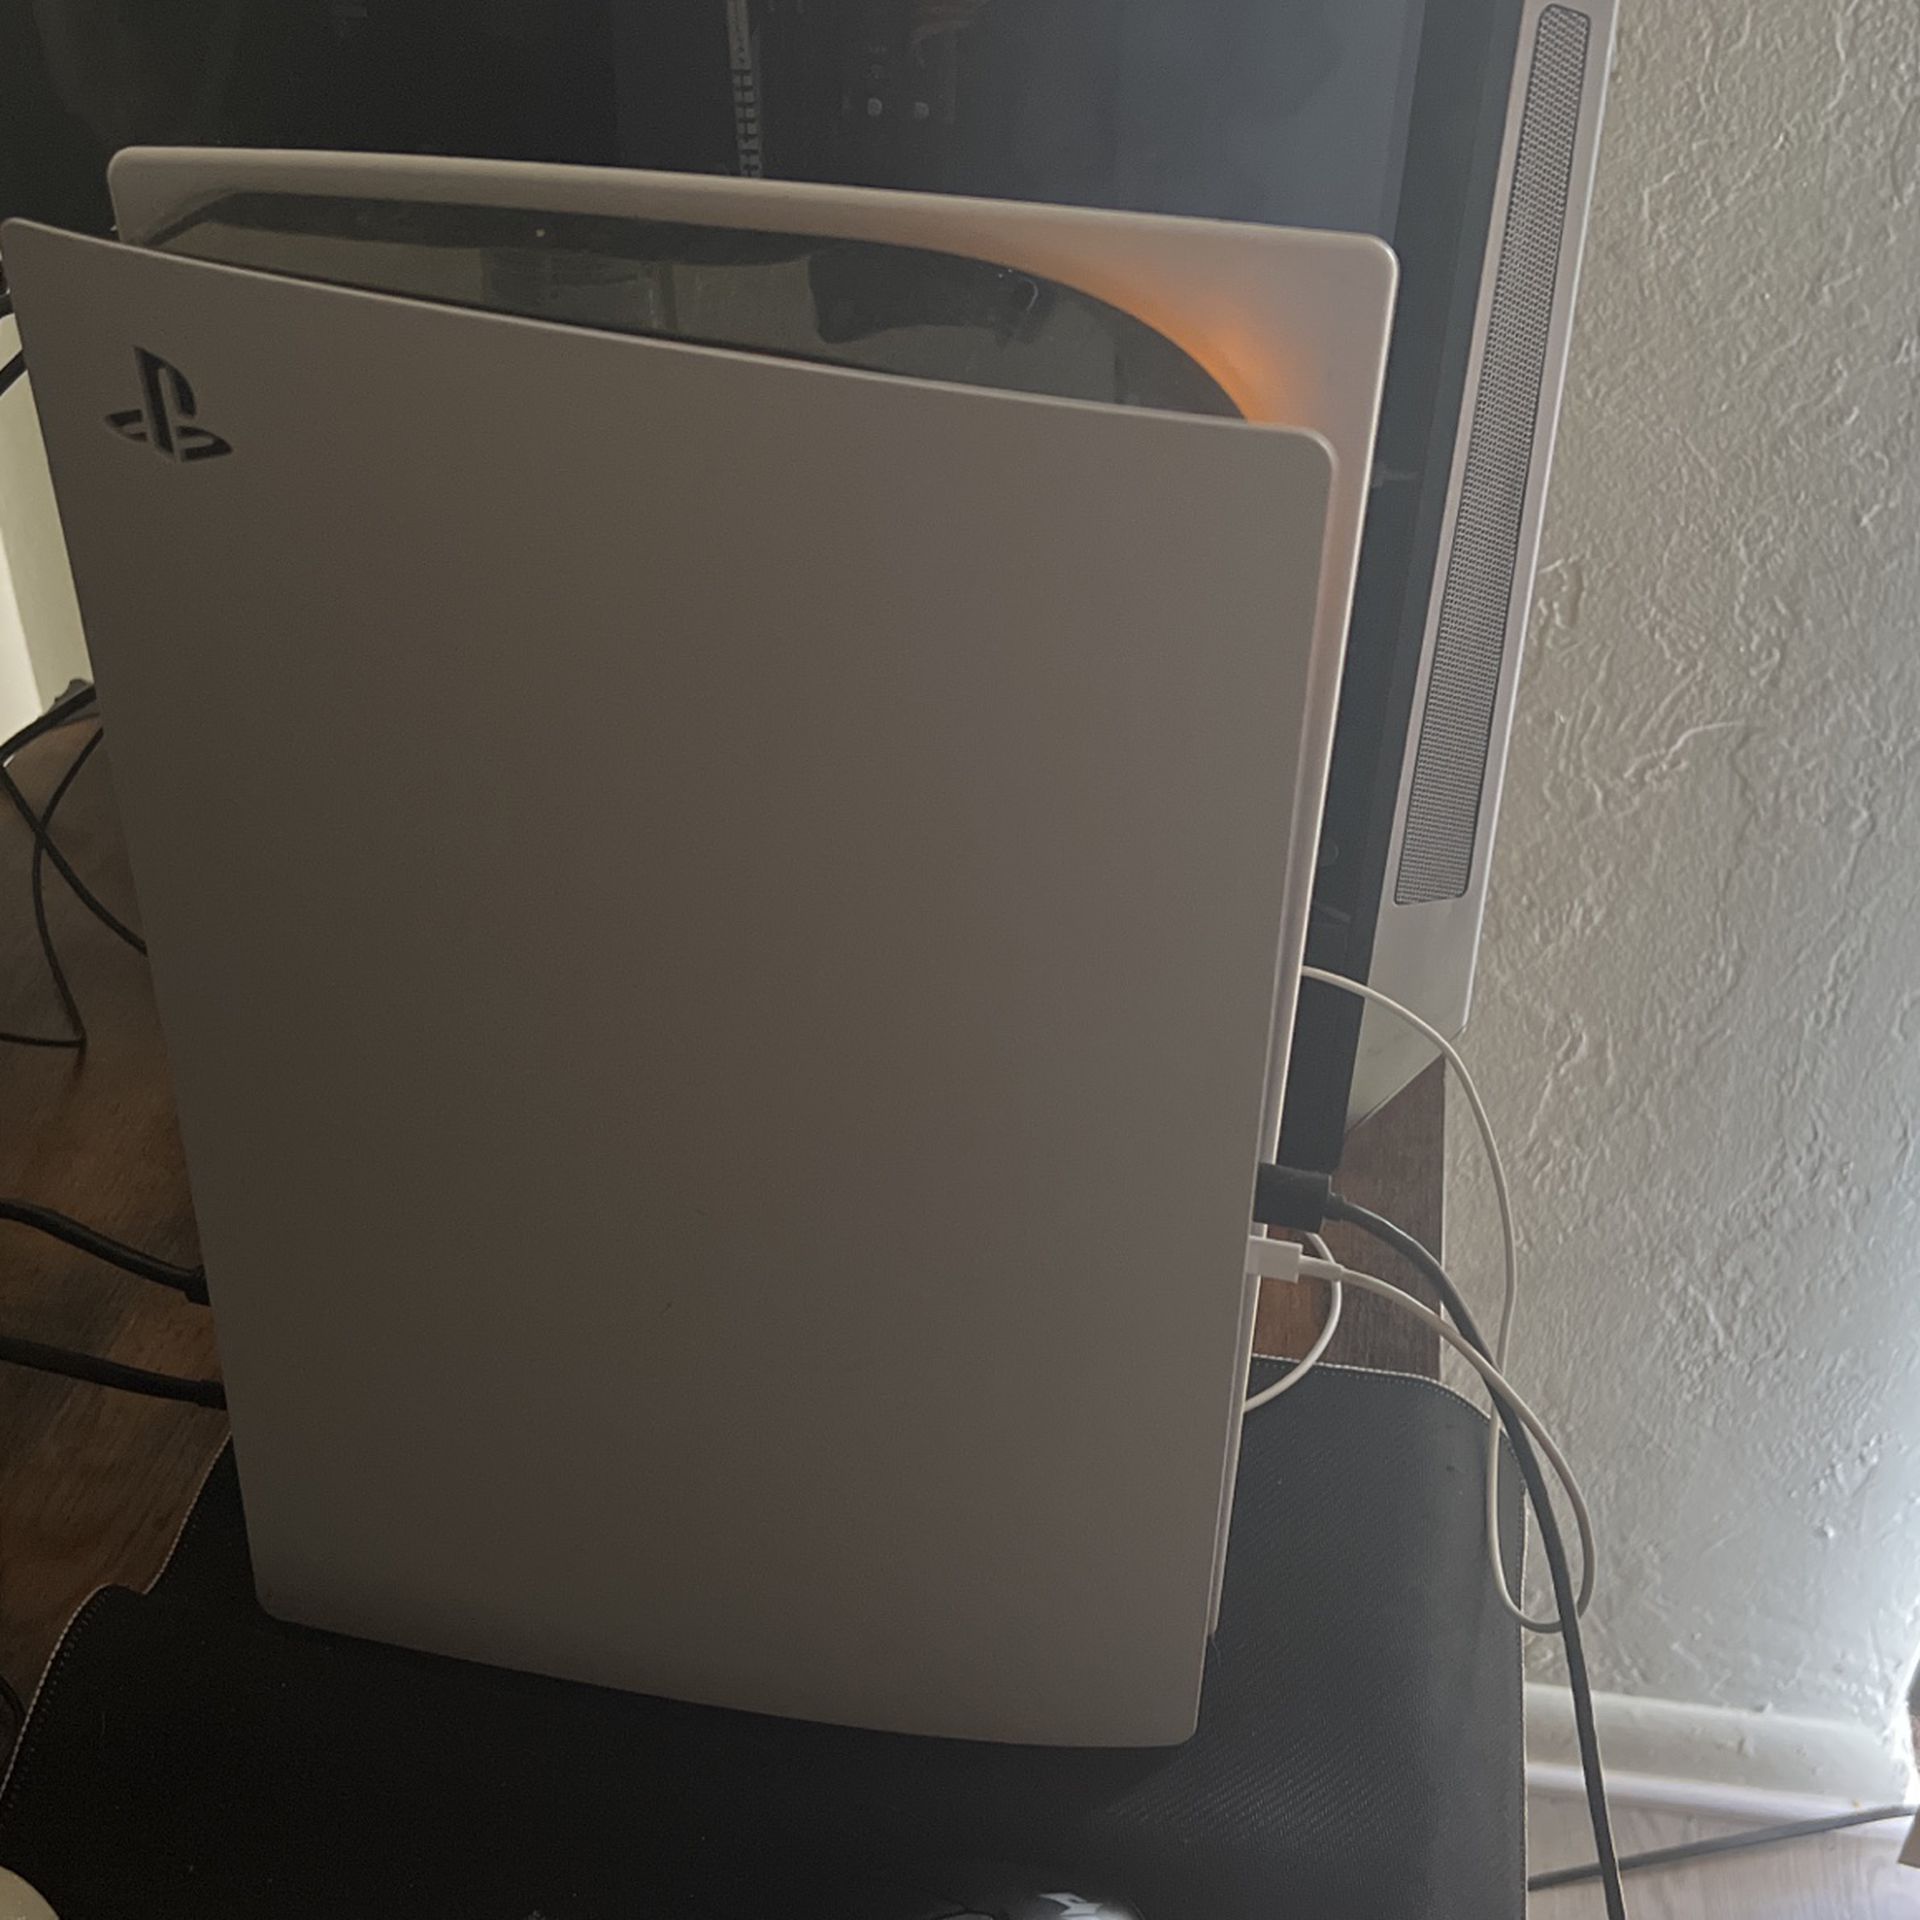 Selling A PS5 With 2 Controllers For $750